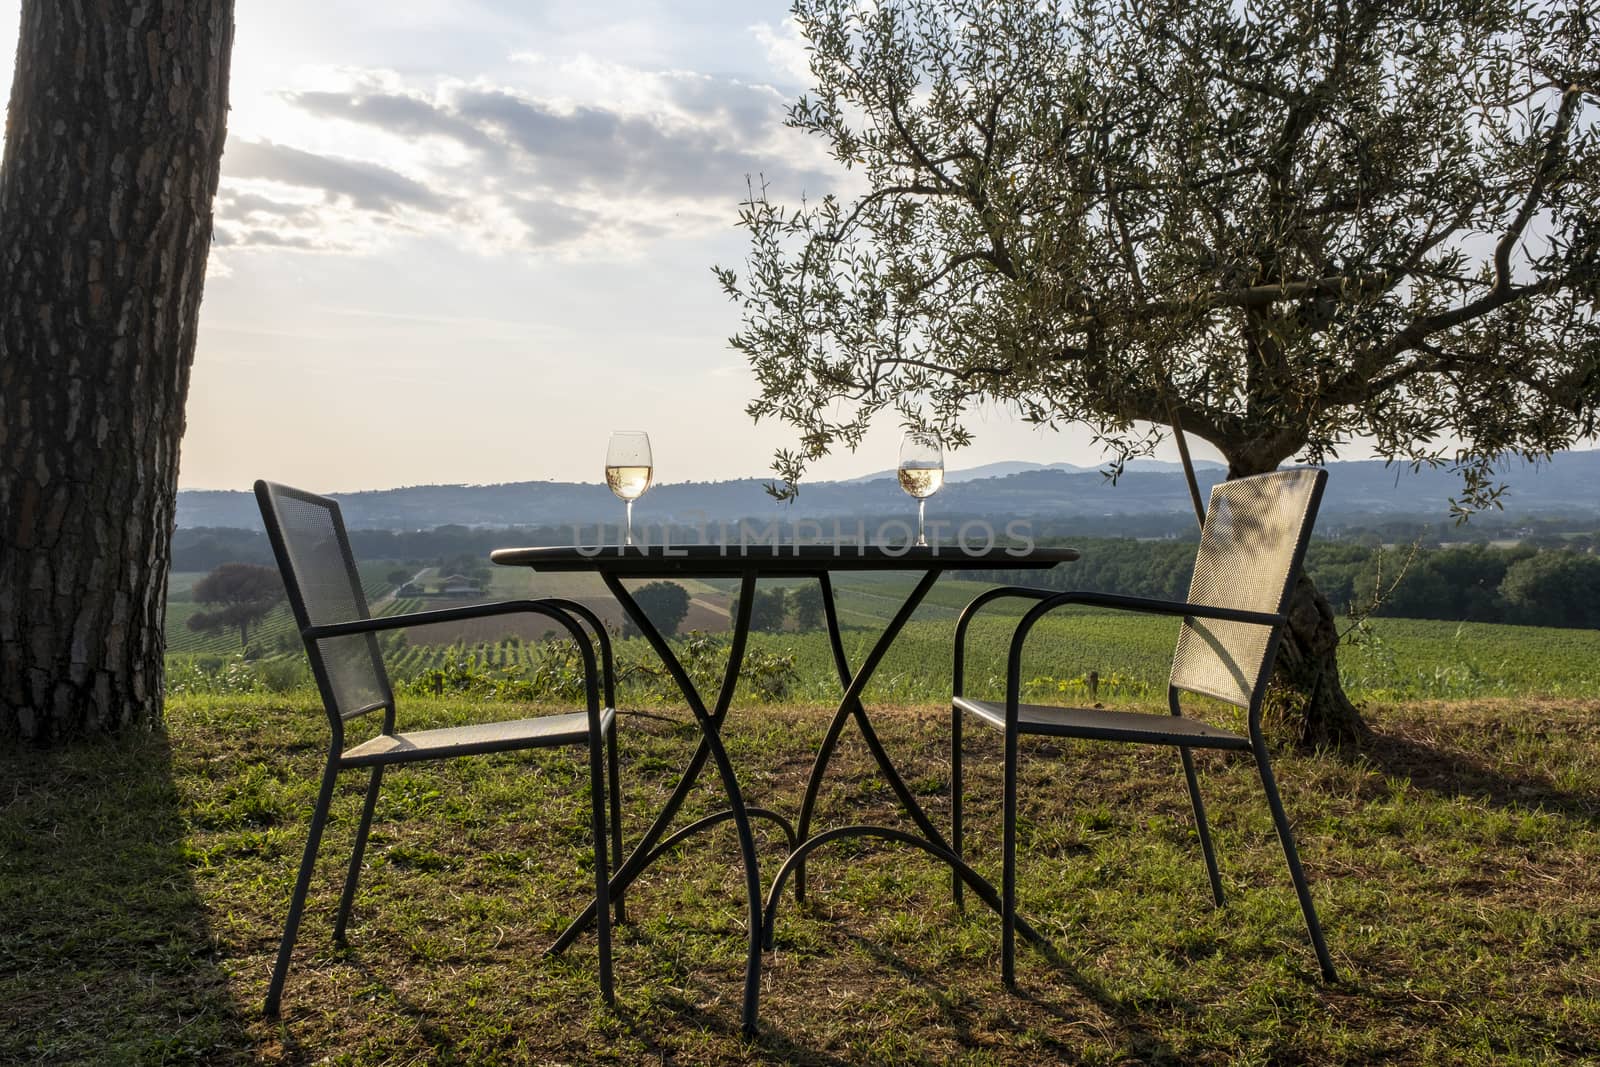 Tables and chairs outside the winery in tuscany in summer at sunset by Tjeerdkruse